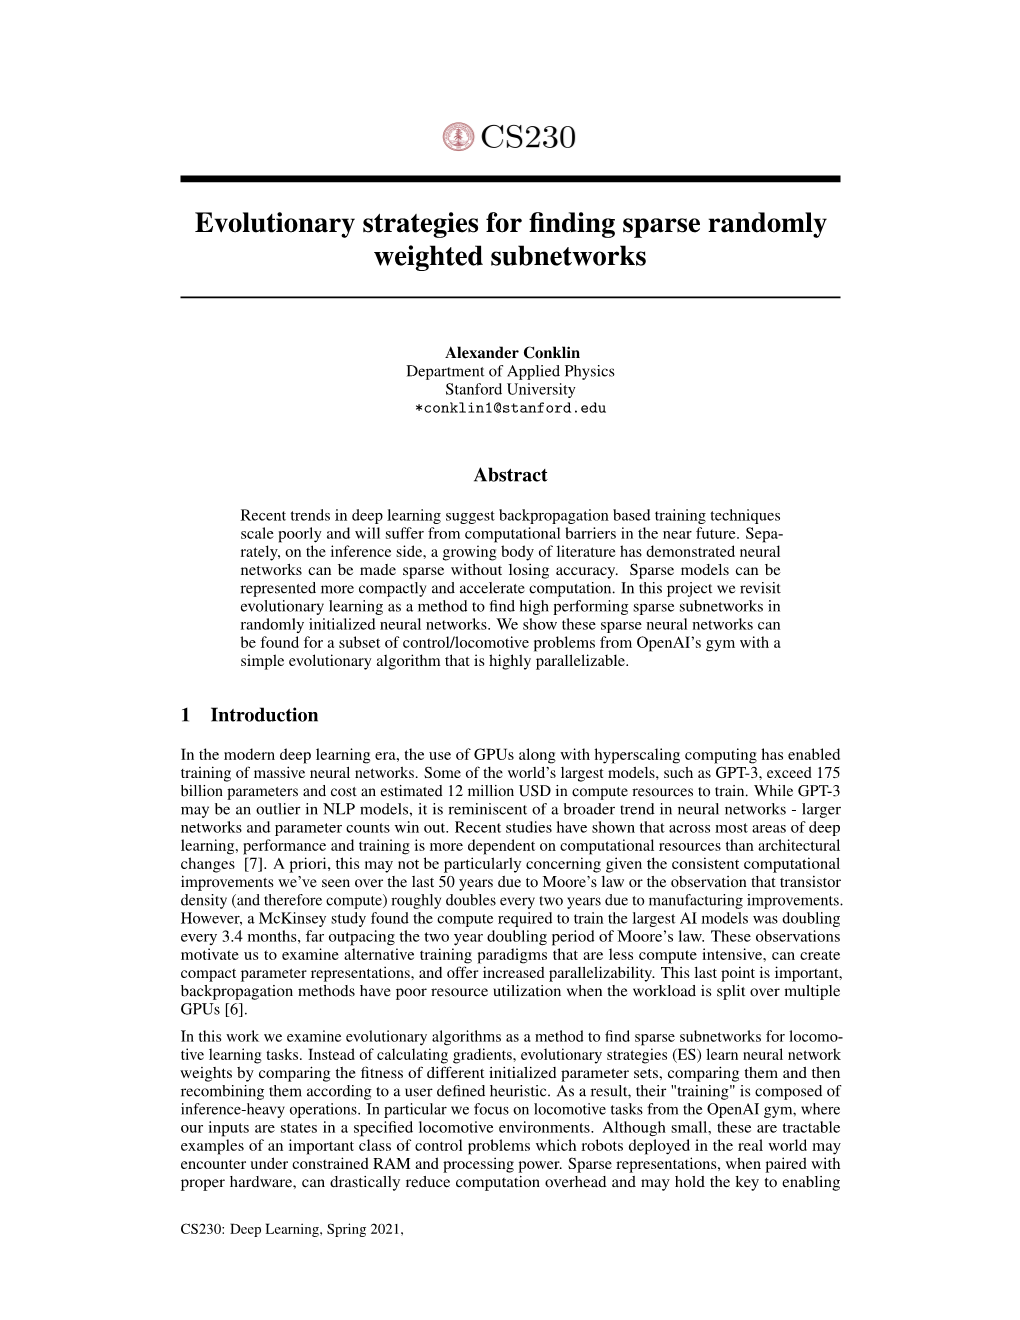 Evolutionary Strategies for Finding Sparse Randomly Weighted Subnetworks